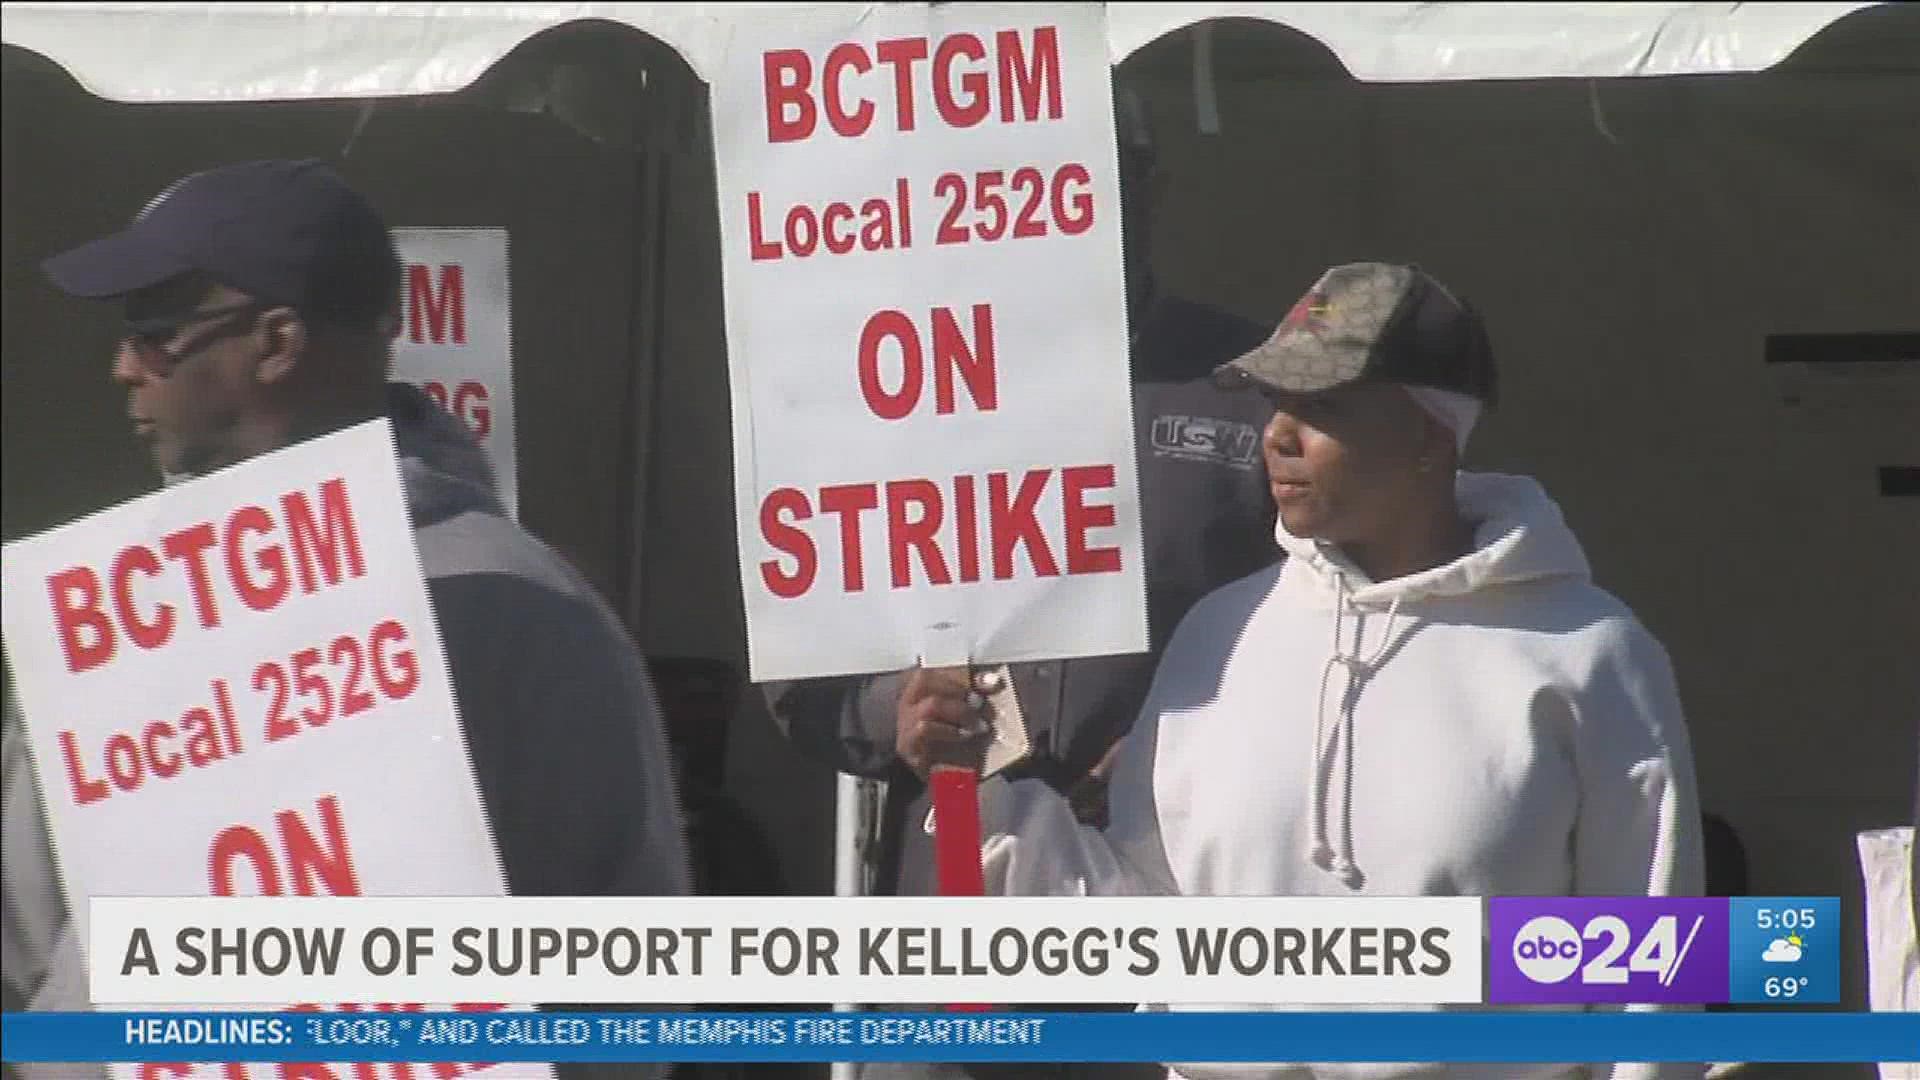 Contract talks between the Kellogg Co. and its 1,400 striking cereal plant workers are set to resume next week.